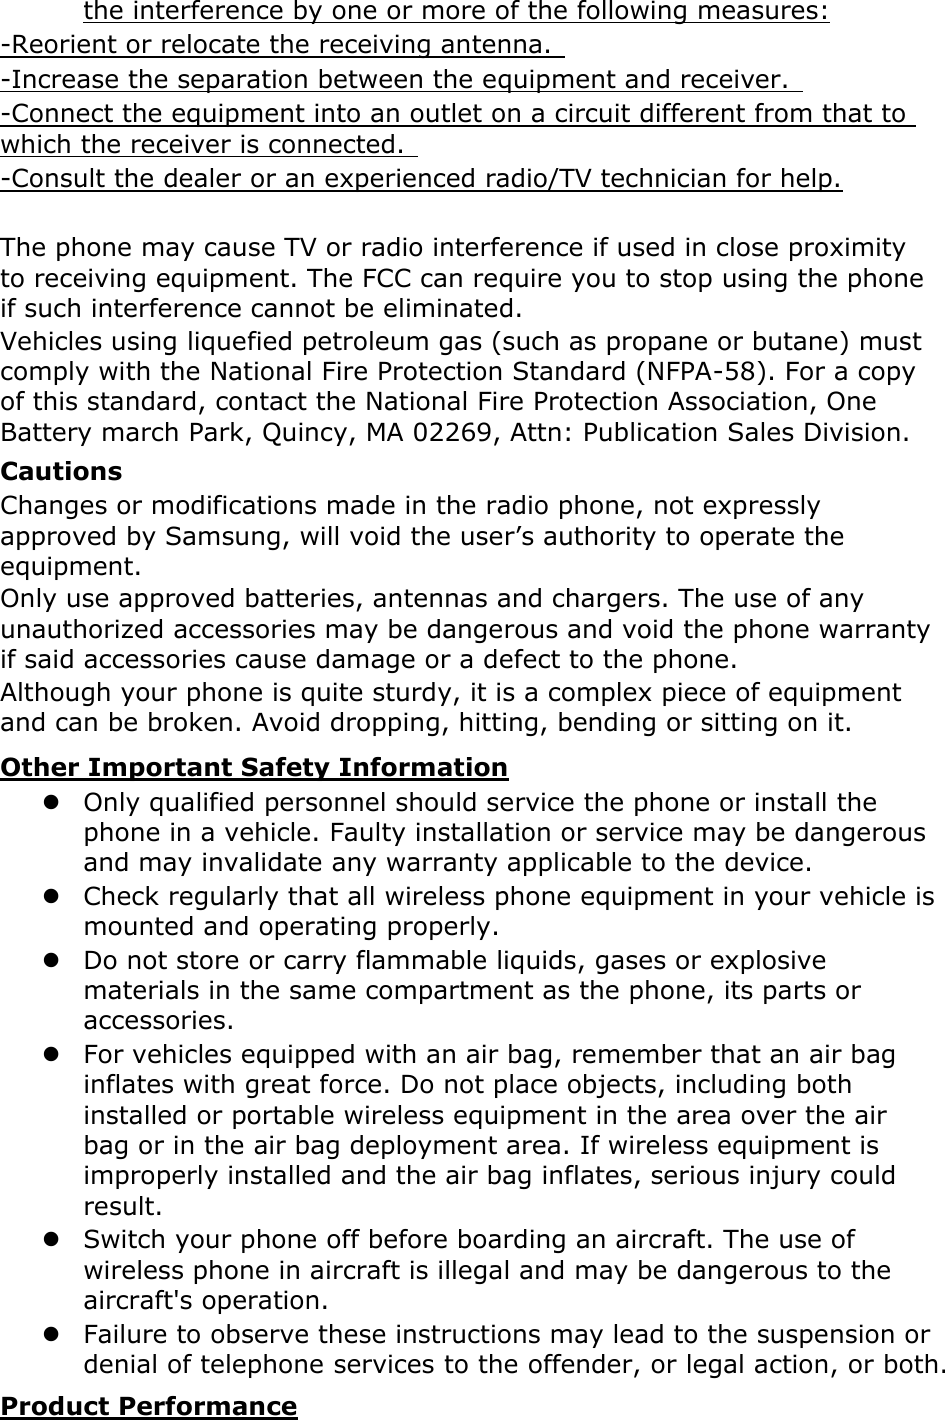 Page 17 of Samsung Electronics Co SGHI677 Cellular/PCS GSM/EDGE/WCDMA Phone with WLAN and Bluetooth User Manual